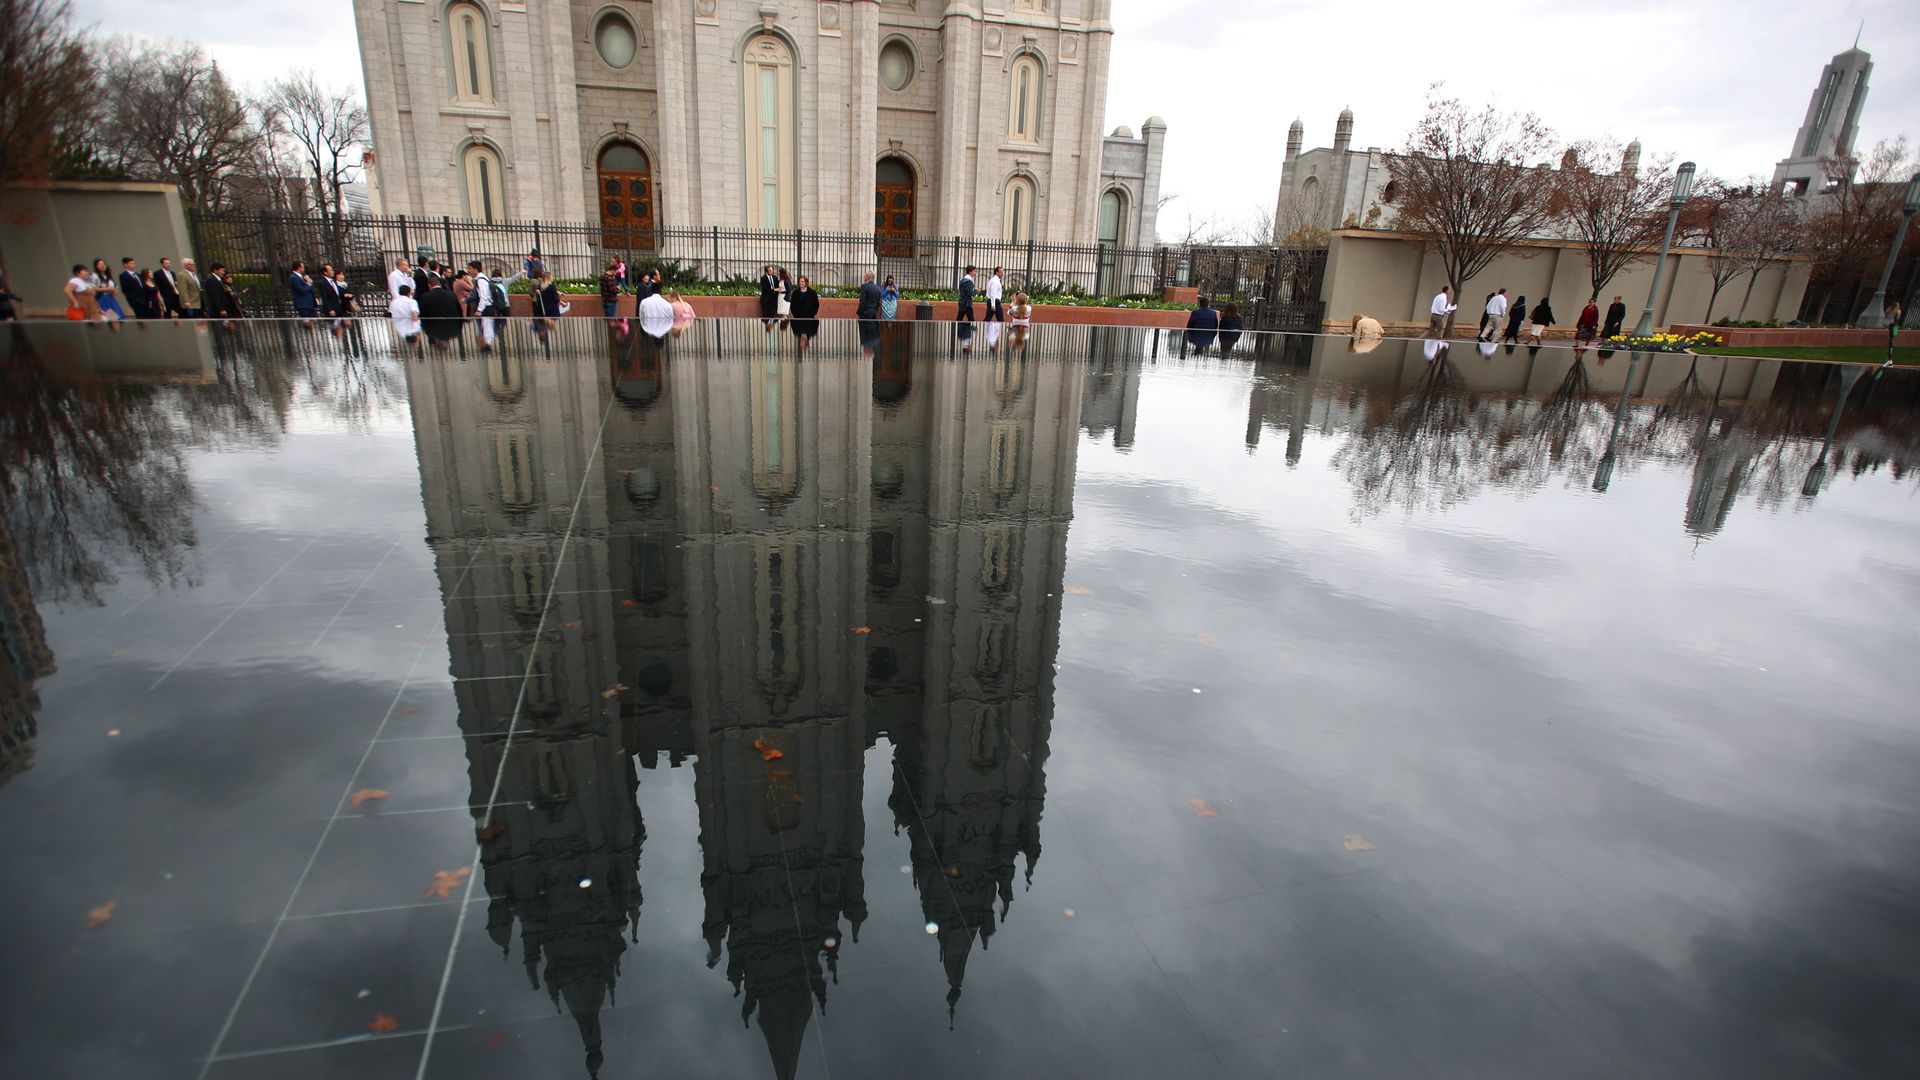  Conference goers walk past a reflection pool and the historic Salt Lake Temple of the Church of Jesus Christ of Latter-Day Saints 